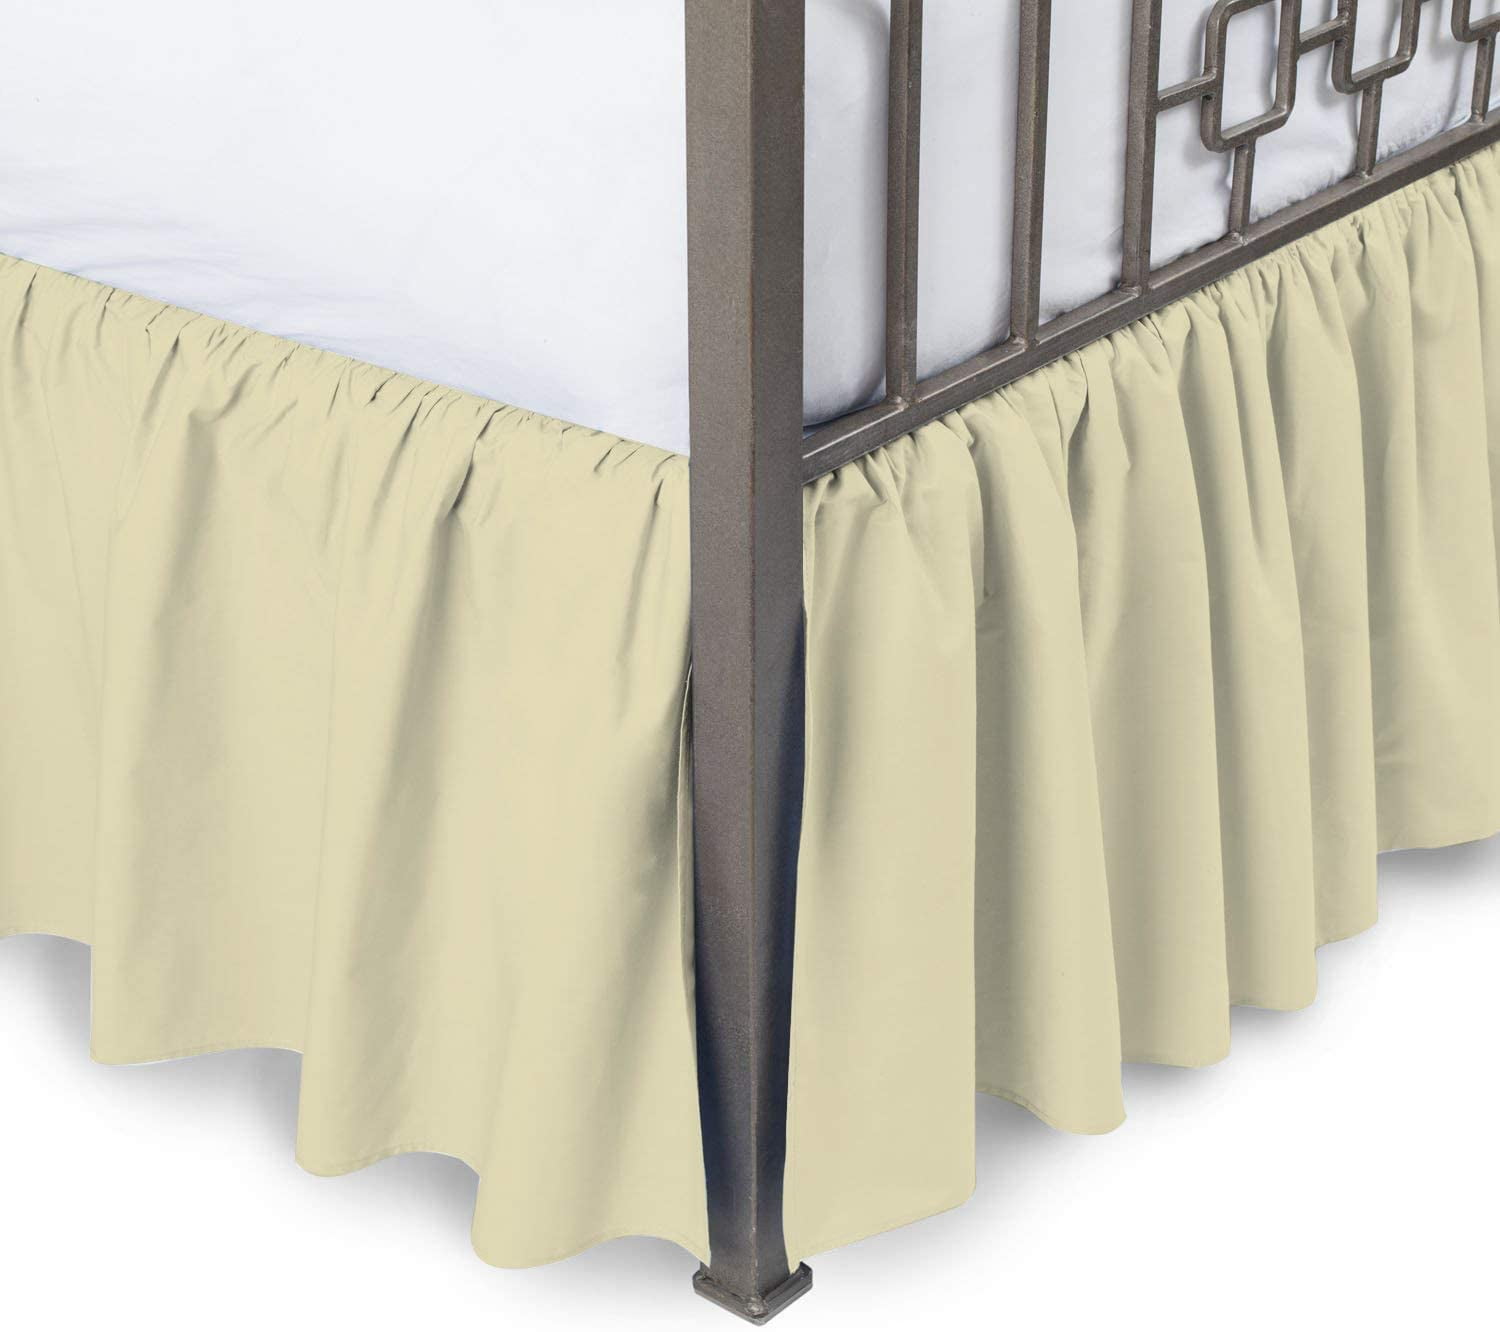 All US Size Bed Skirt Extra Drop Length 1000 Thread Count Egyptian Cotton Solid. 